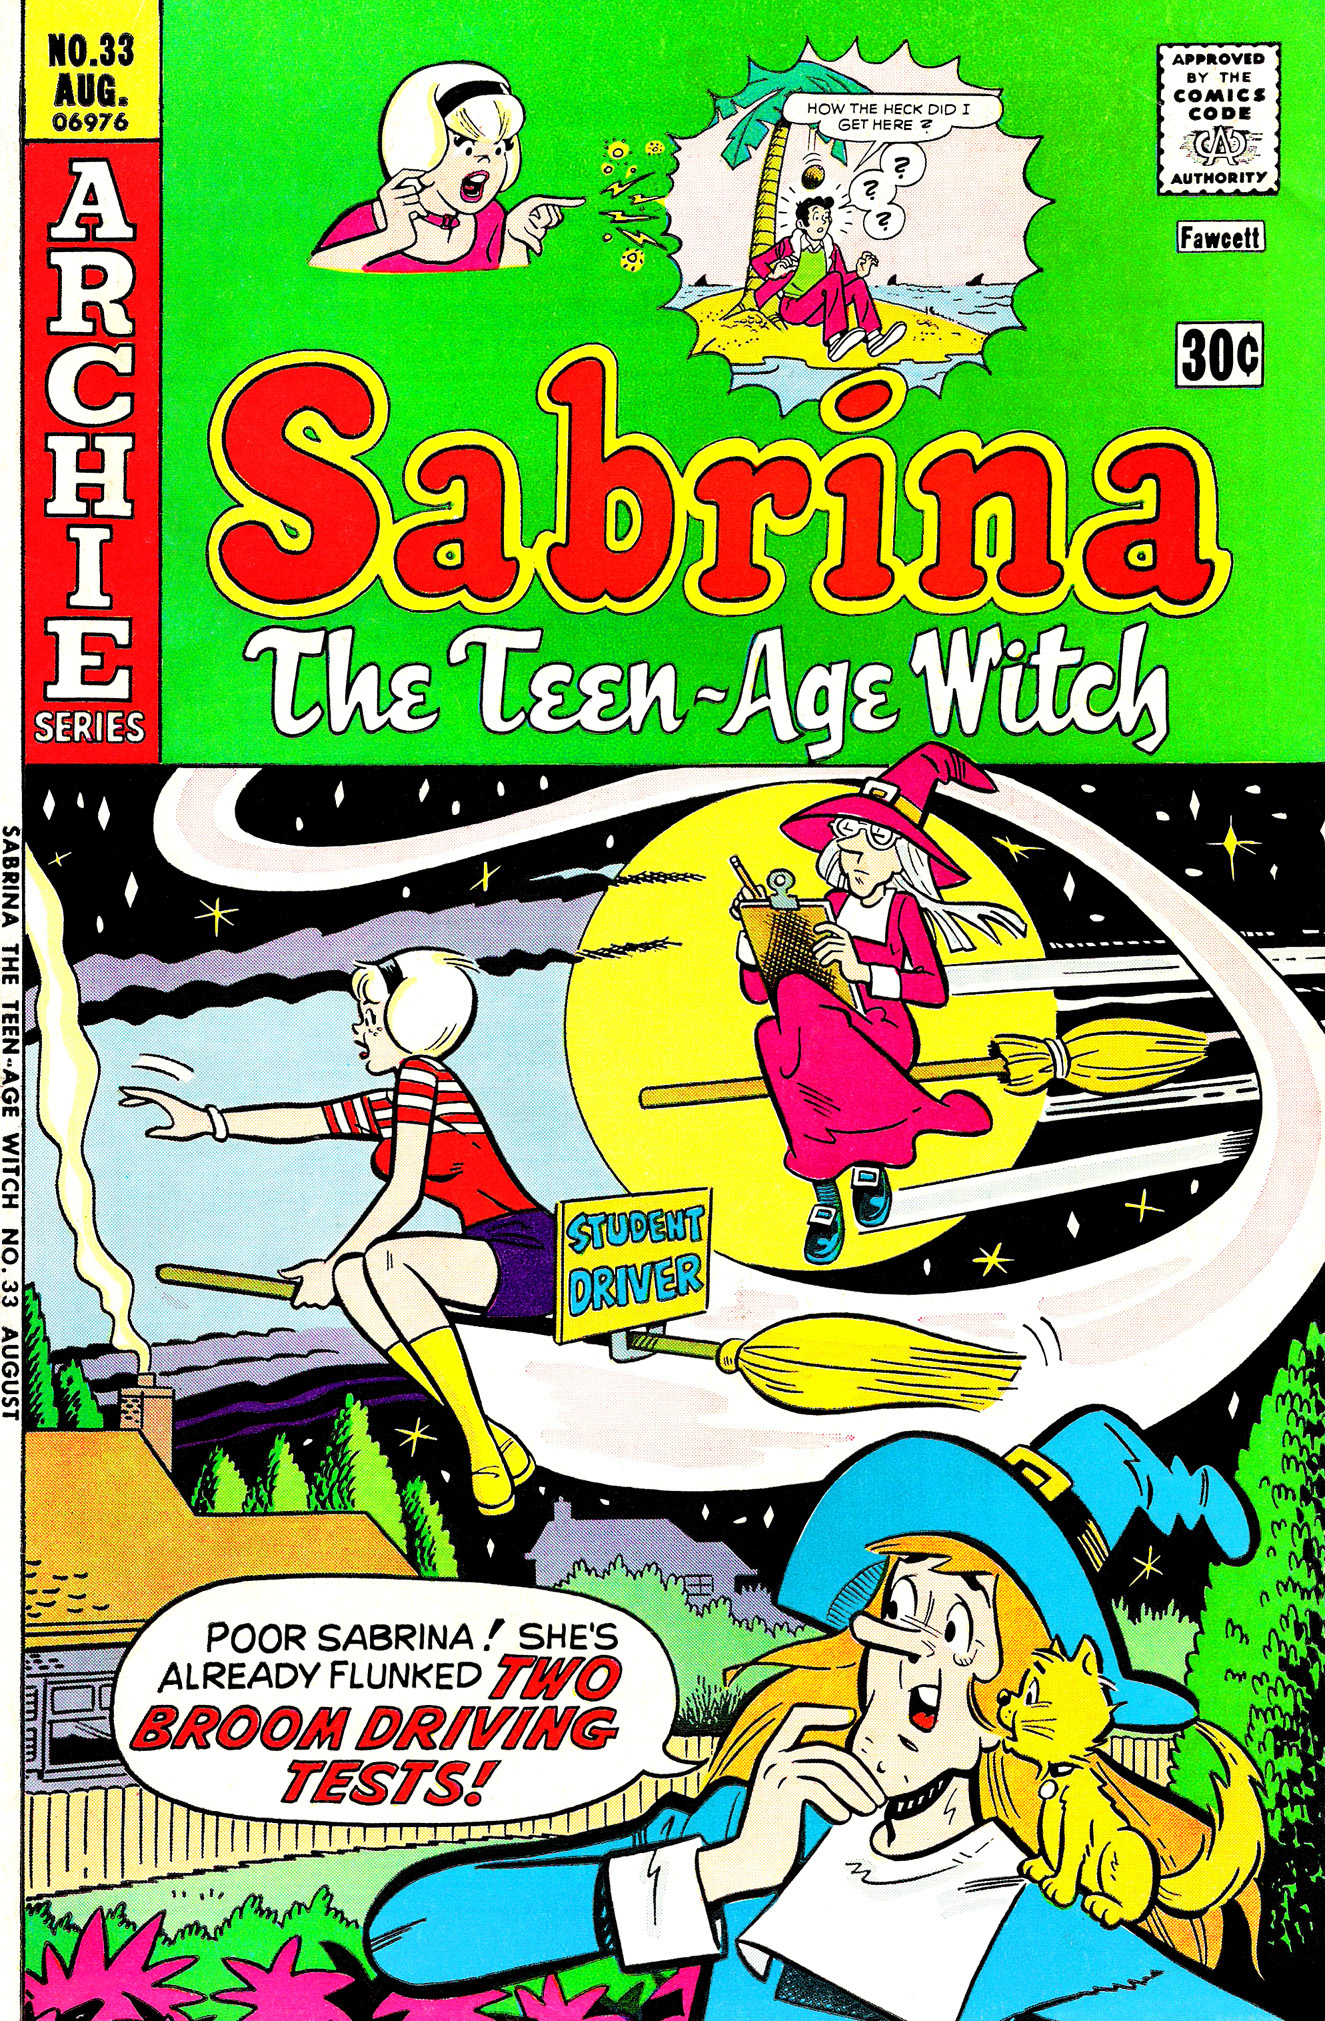 Sabrina The Teenage Witch (1971) Issue #33 #33 - English 1